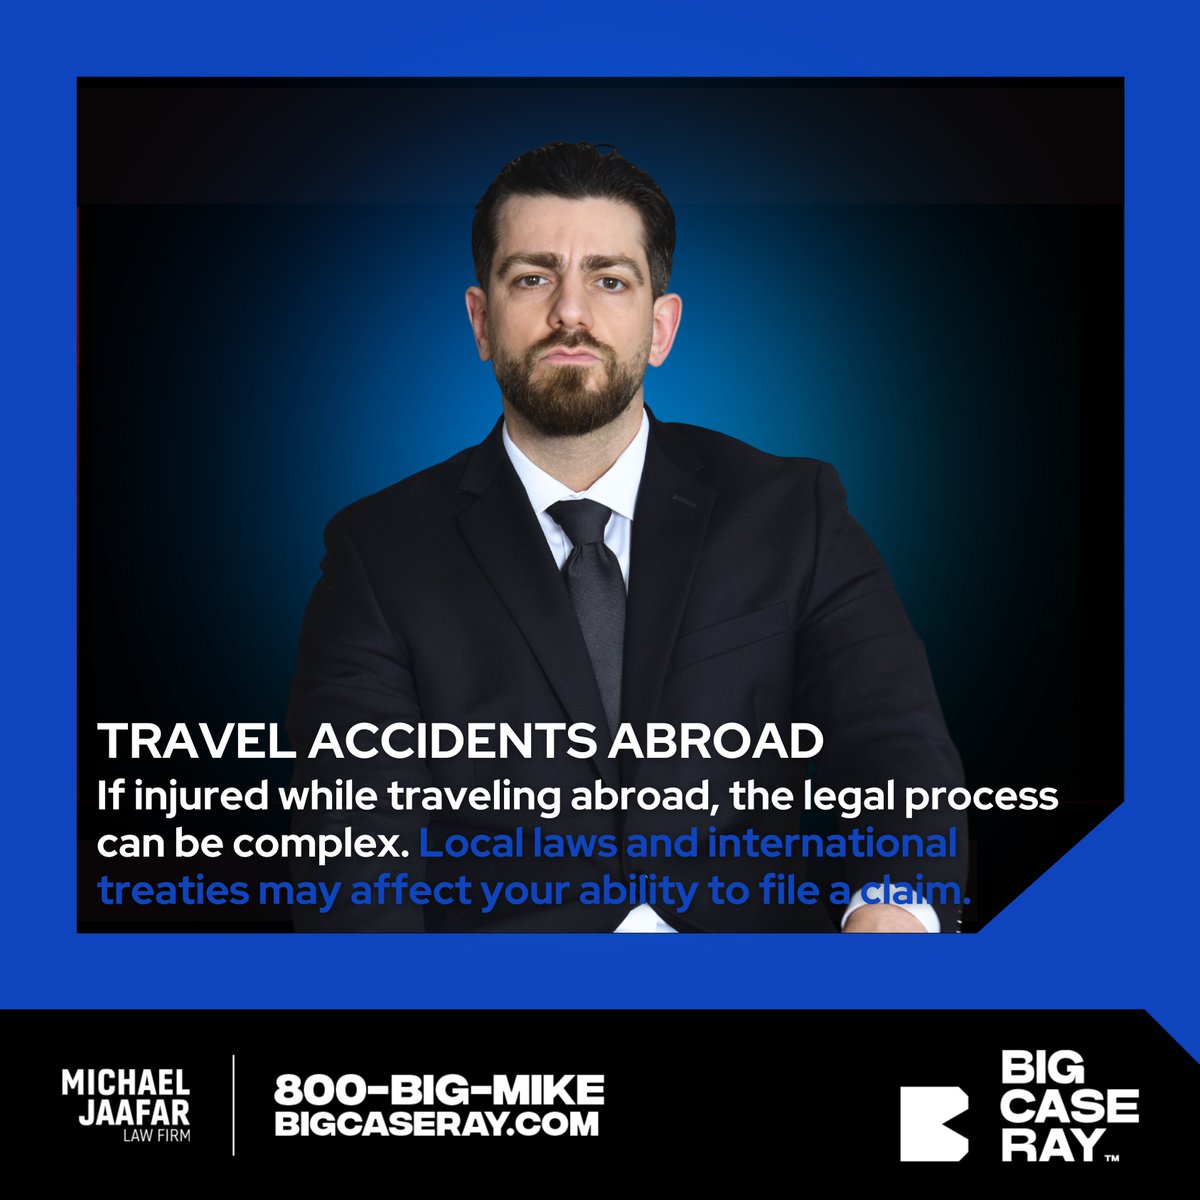 BIG CASE RAY
'Travel Accidents Abroad'
Personal Injury Facts. 💡
.
.
.
.
.
#bigcaseray #rayrahal #mikejaafar #bigmike #800bigmike #personalinjury #personalinjurylawyer
#injuryattorney
#accidentlawyer
#legalhelp
#injured
#compensation
#justice
#personalinjuryclaim
#lawyerlife